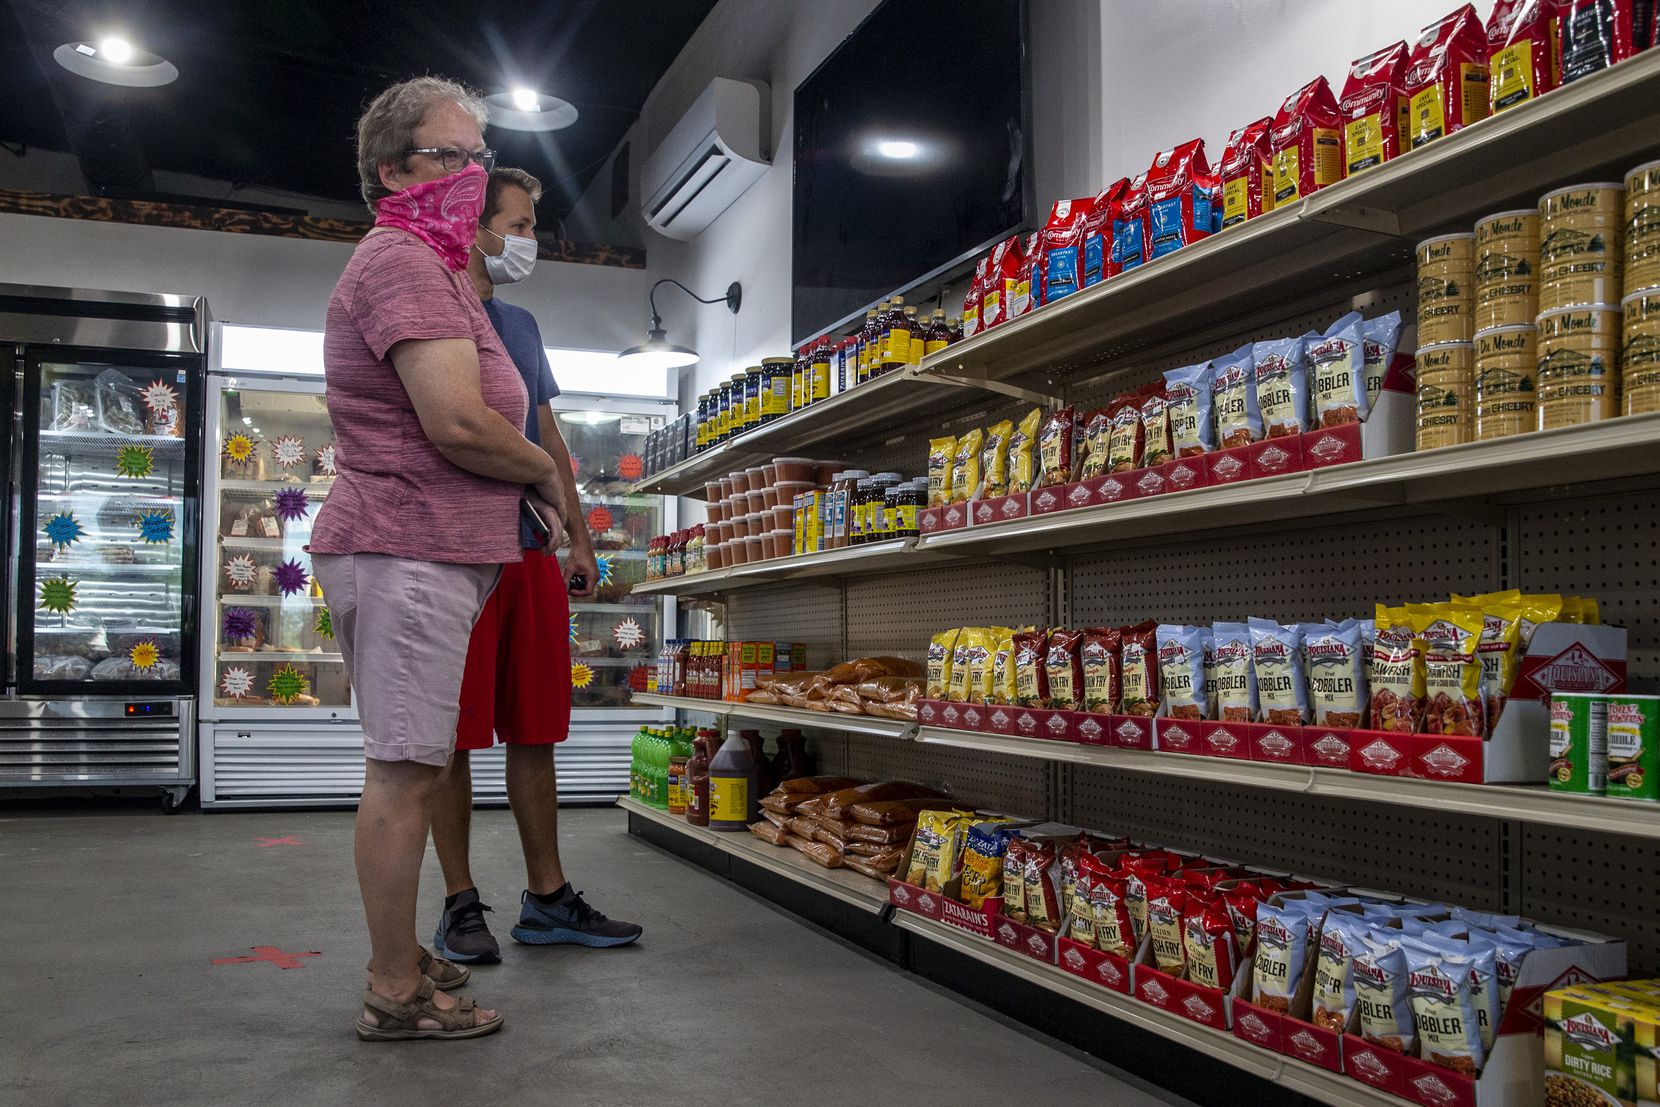 Cindy Brachey and her son, Tommy, peruse the market cajun convenience items kept in stock at T-Johnny's Seafood and Cajun Market in Colleyville, Texas, on Wednesday, July 8, 2020. 